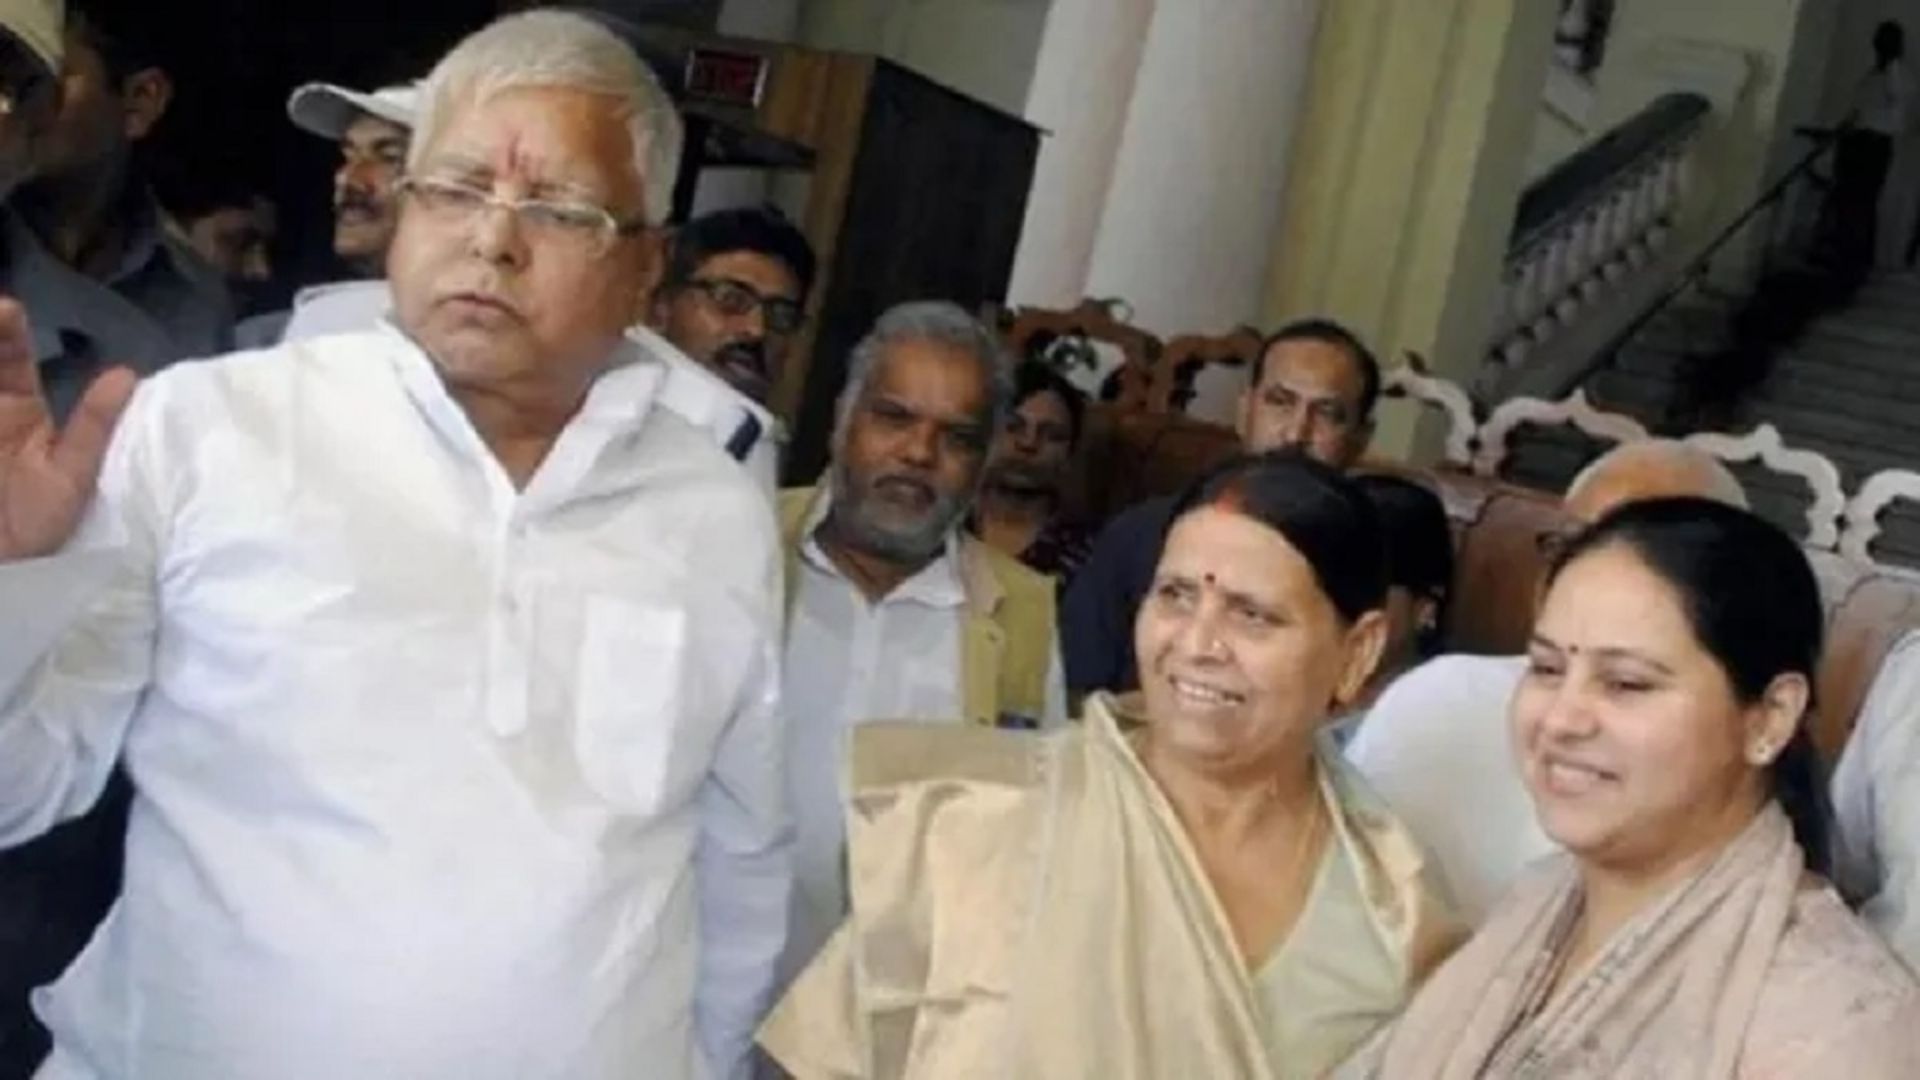 Land-for-Jobs scam case: Rouse Avenue Court grants interim bail to Lalu Yadav’s wife Rabri Devi, daughters